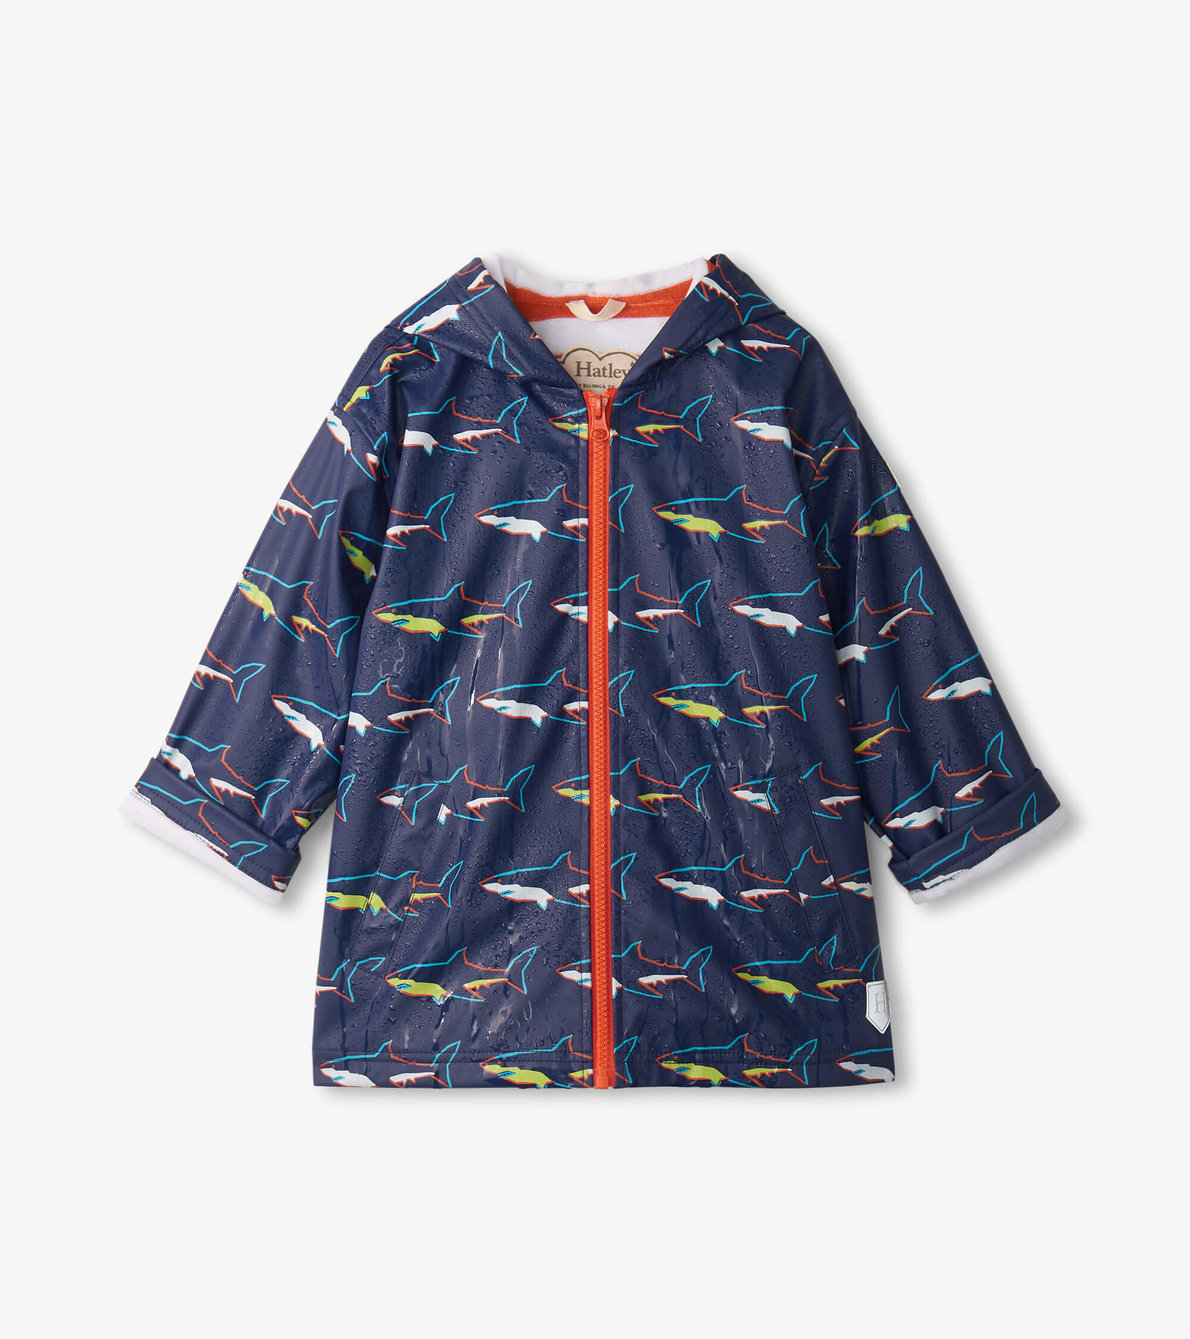 View larger image of Boys Sharks Zip-Up Raincoat